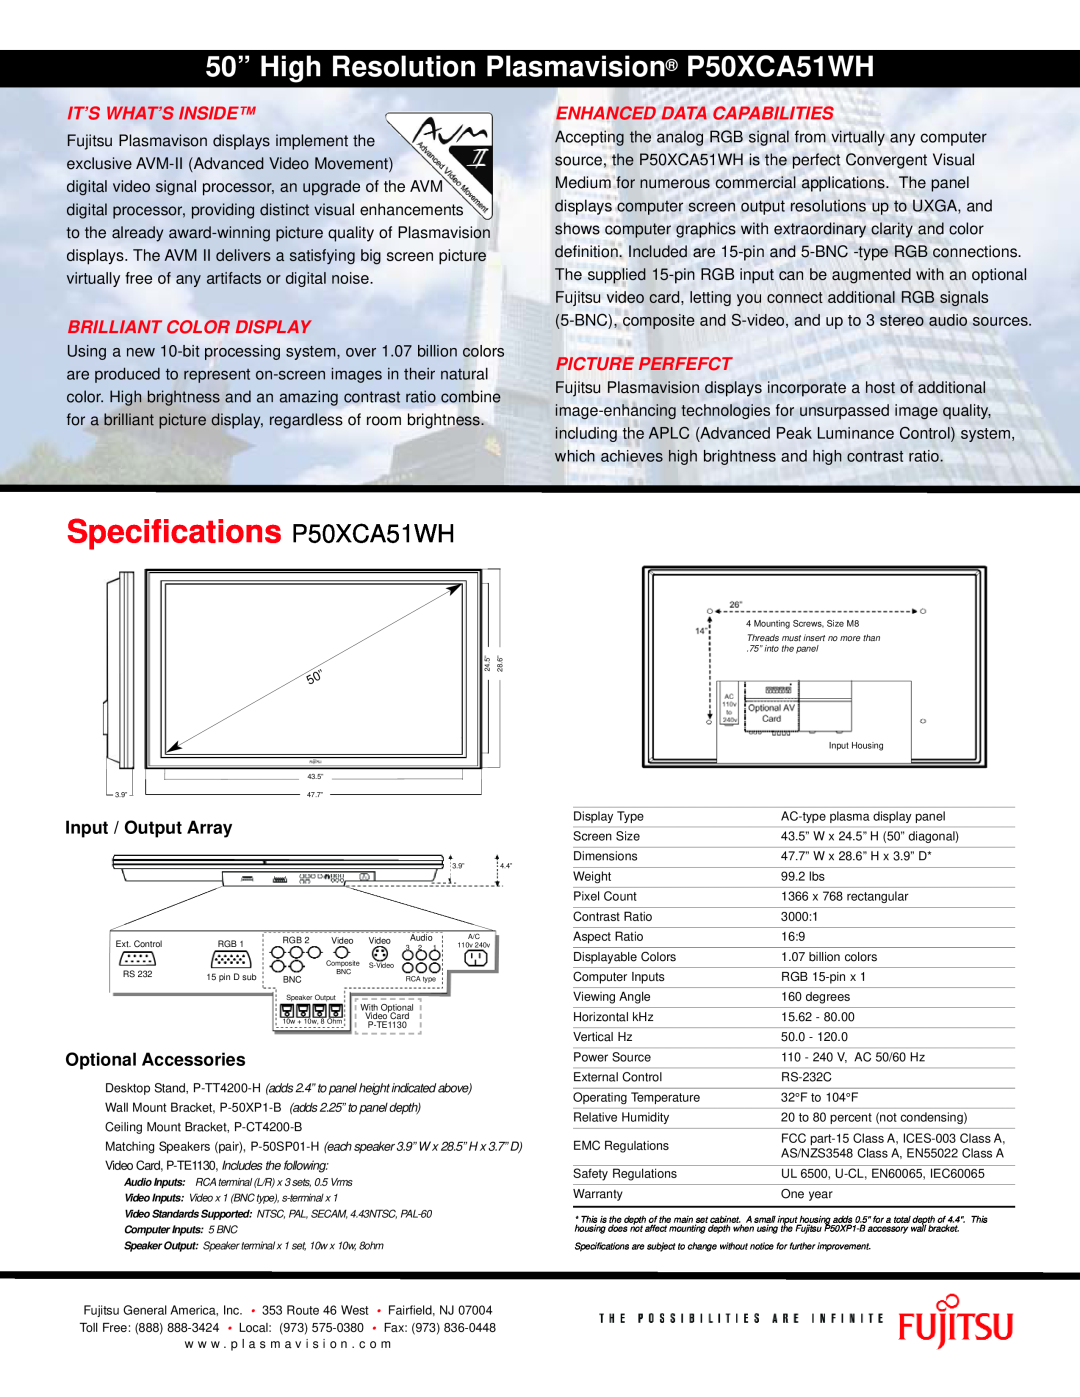 Fujitsu Specifications P50XCA51WH, 50” High Resolution Plasmavision P50XCA51WH, It’S What’S Inside, Picture Perfefct 